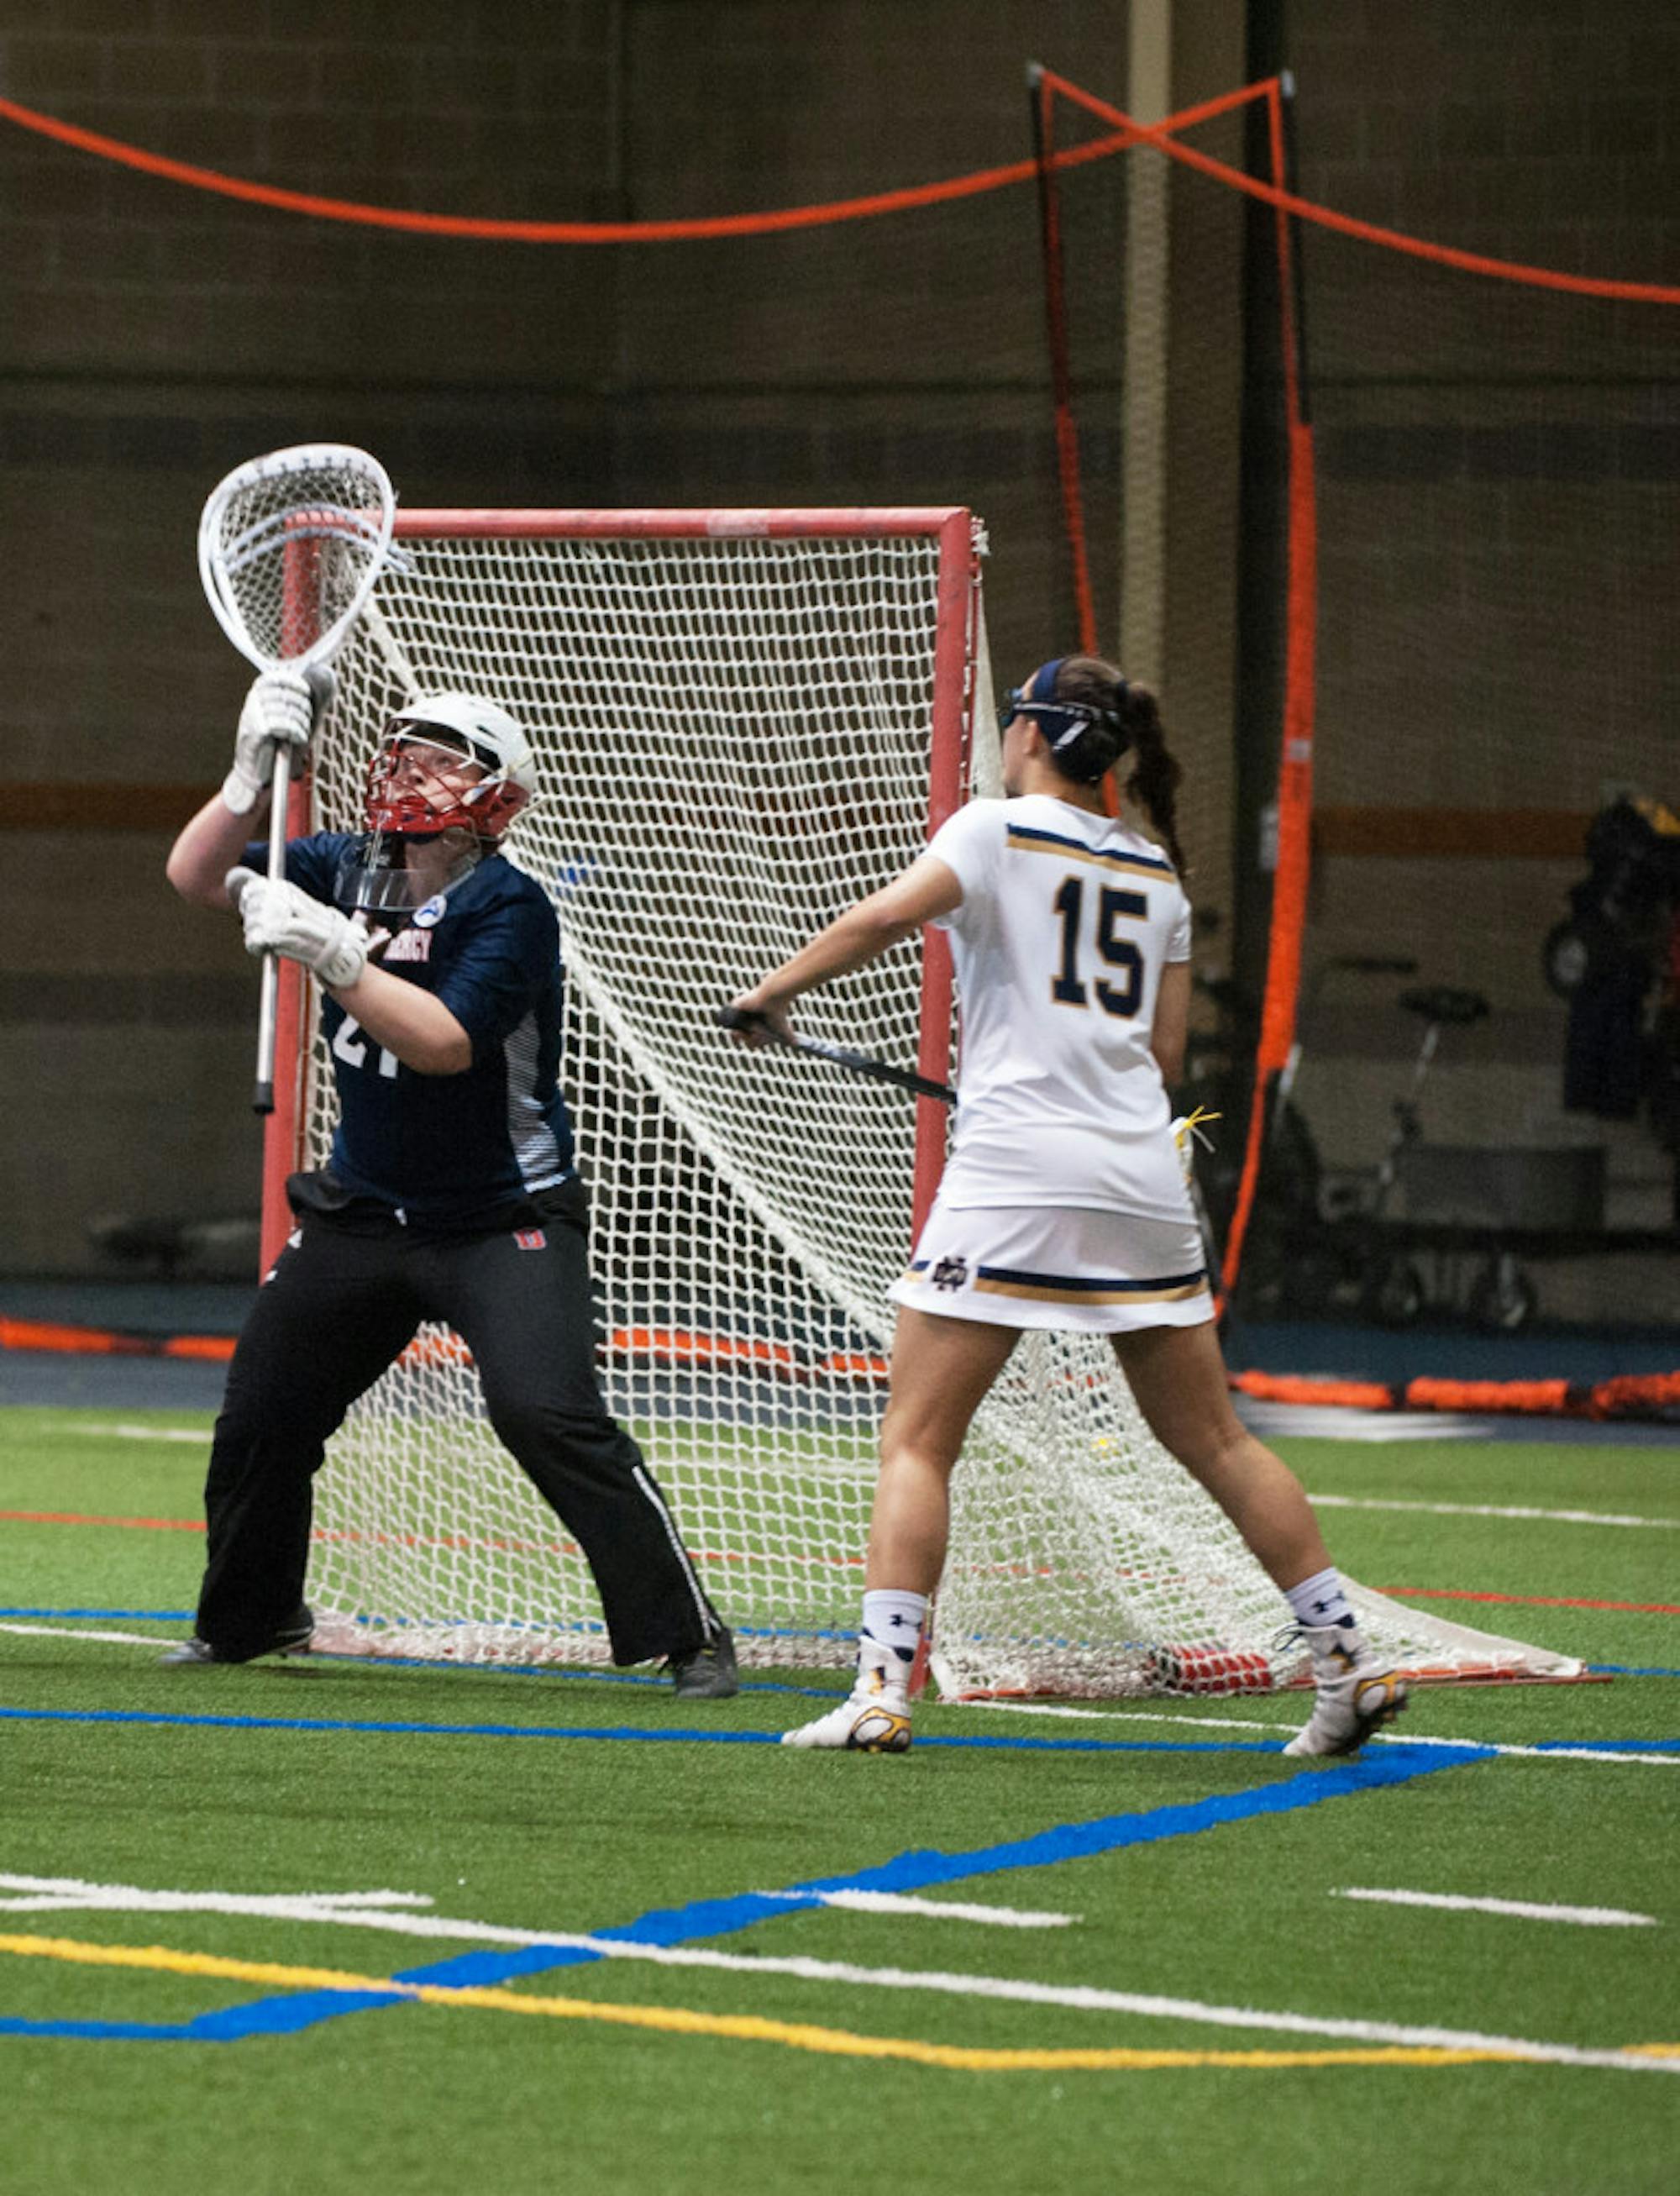 Irish senior attack Cortney Fortunato watches a shot during Notre Dame's 24-9 win over Detroit at Loftus Sports Center on Feb. 11.